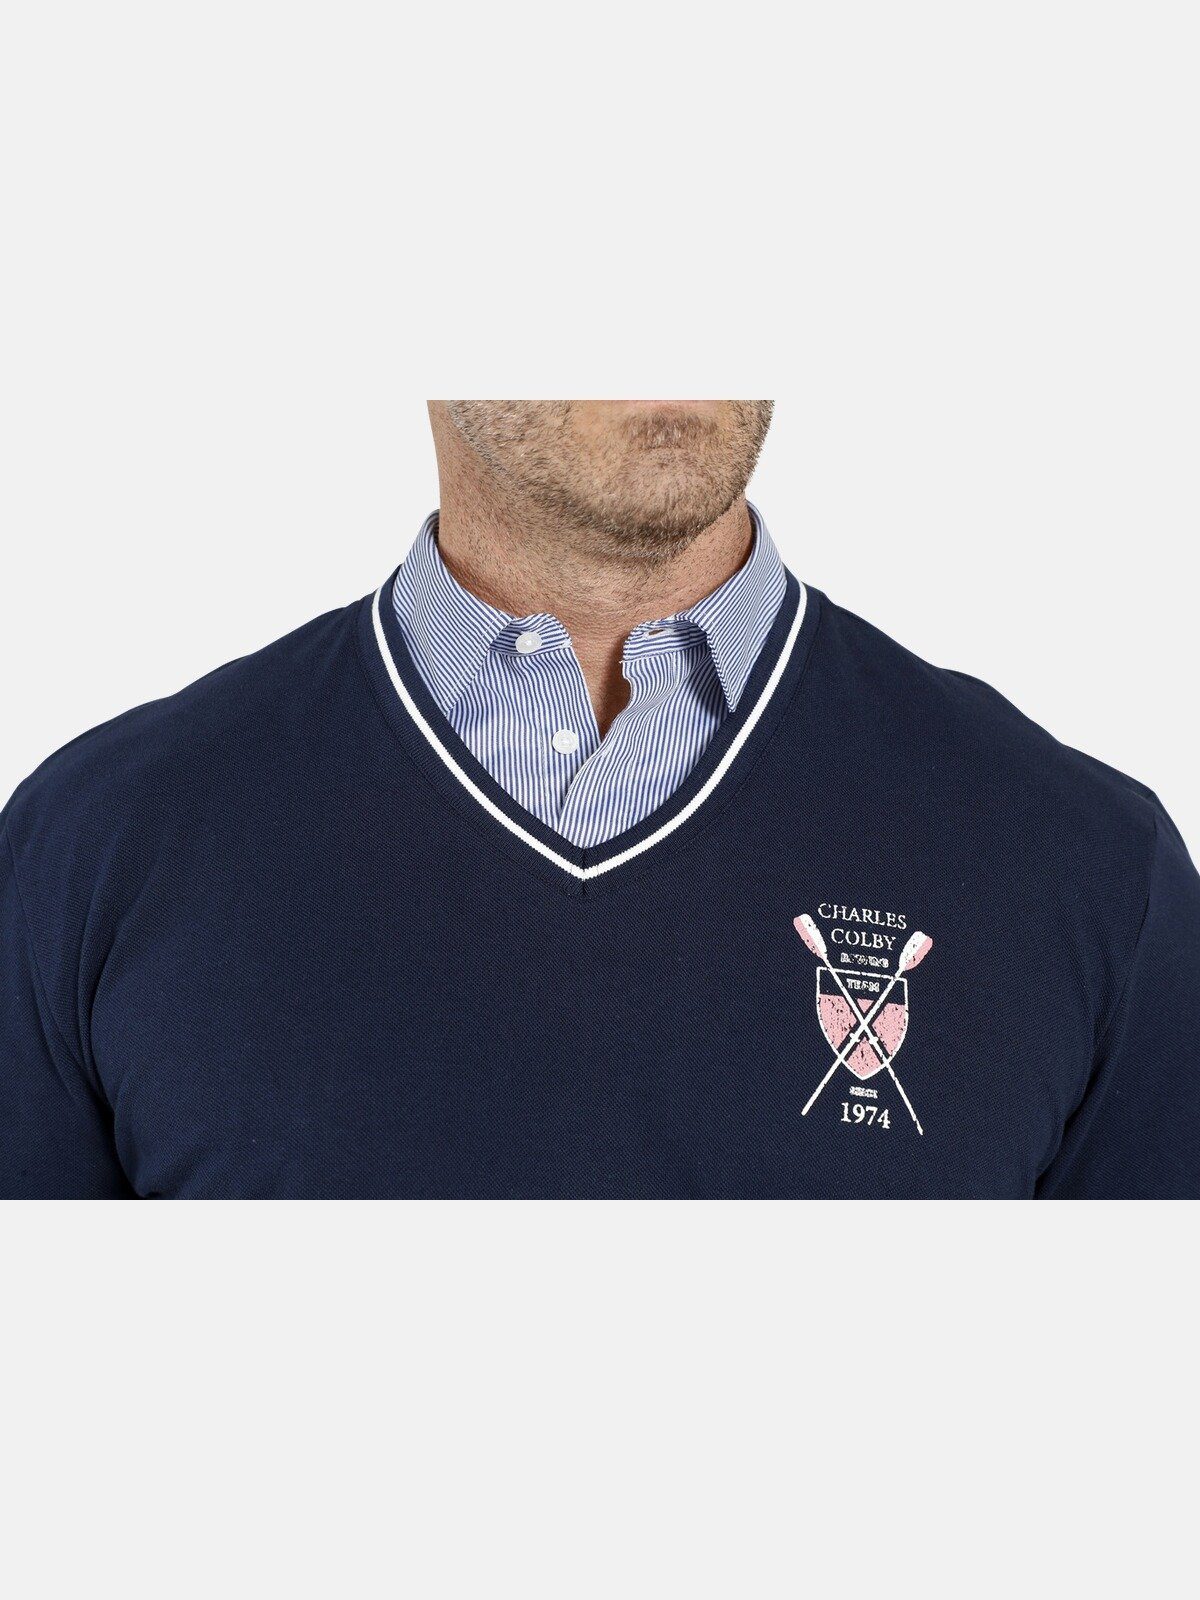 WILLERS EARL Poloshirt mit Charles Colby Business-Kragen